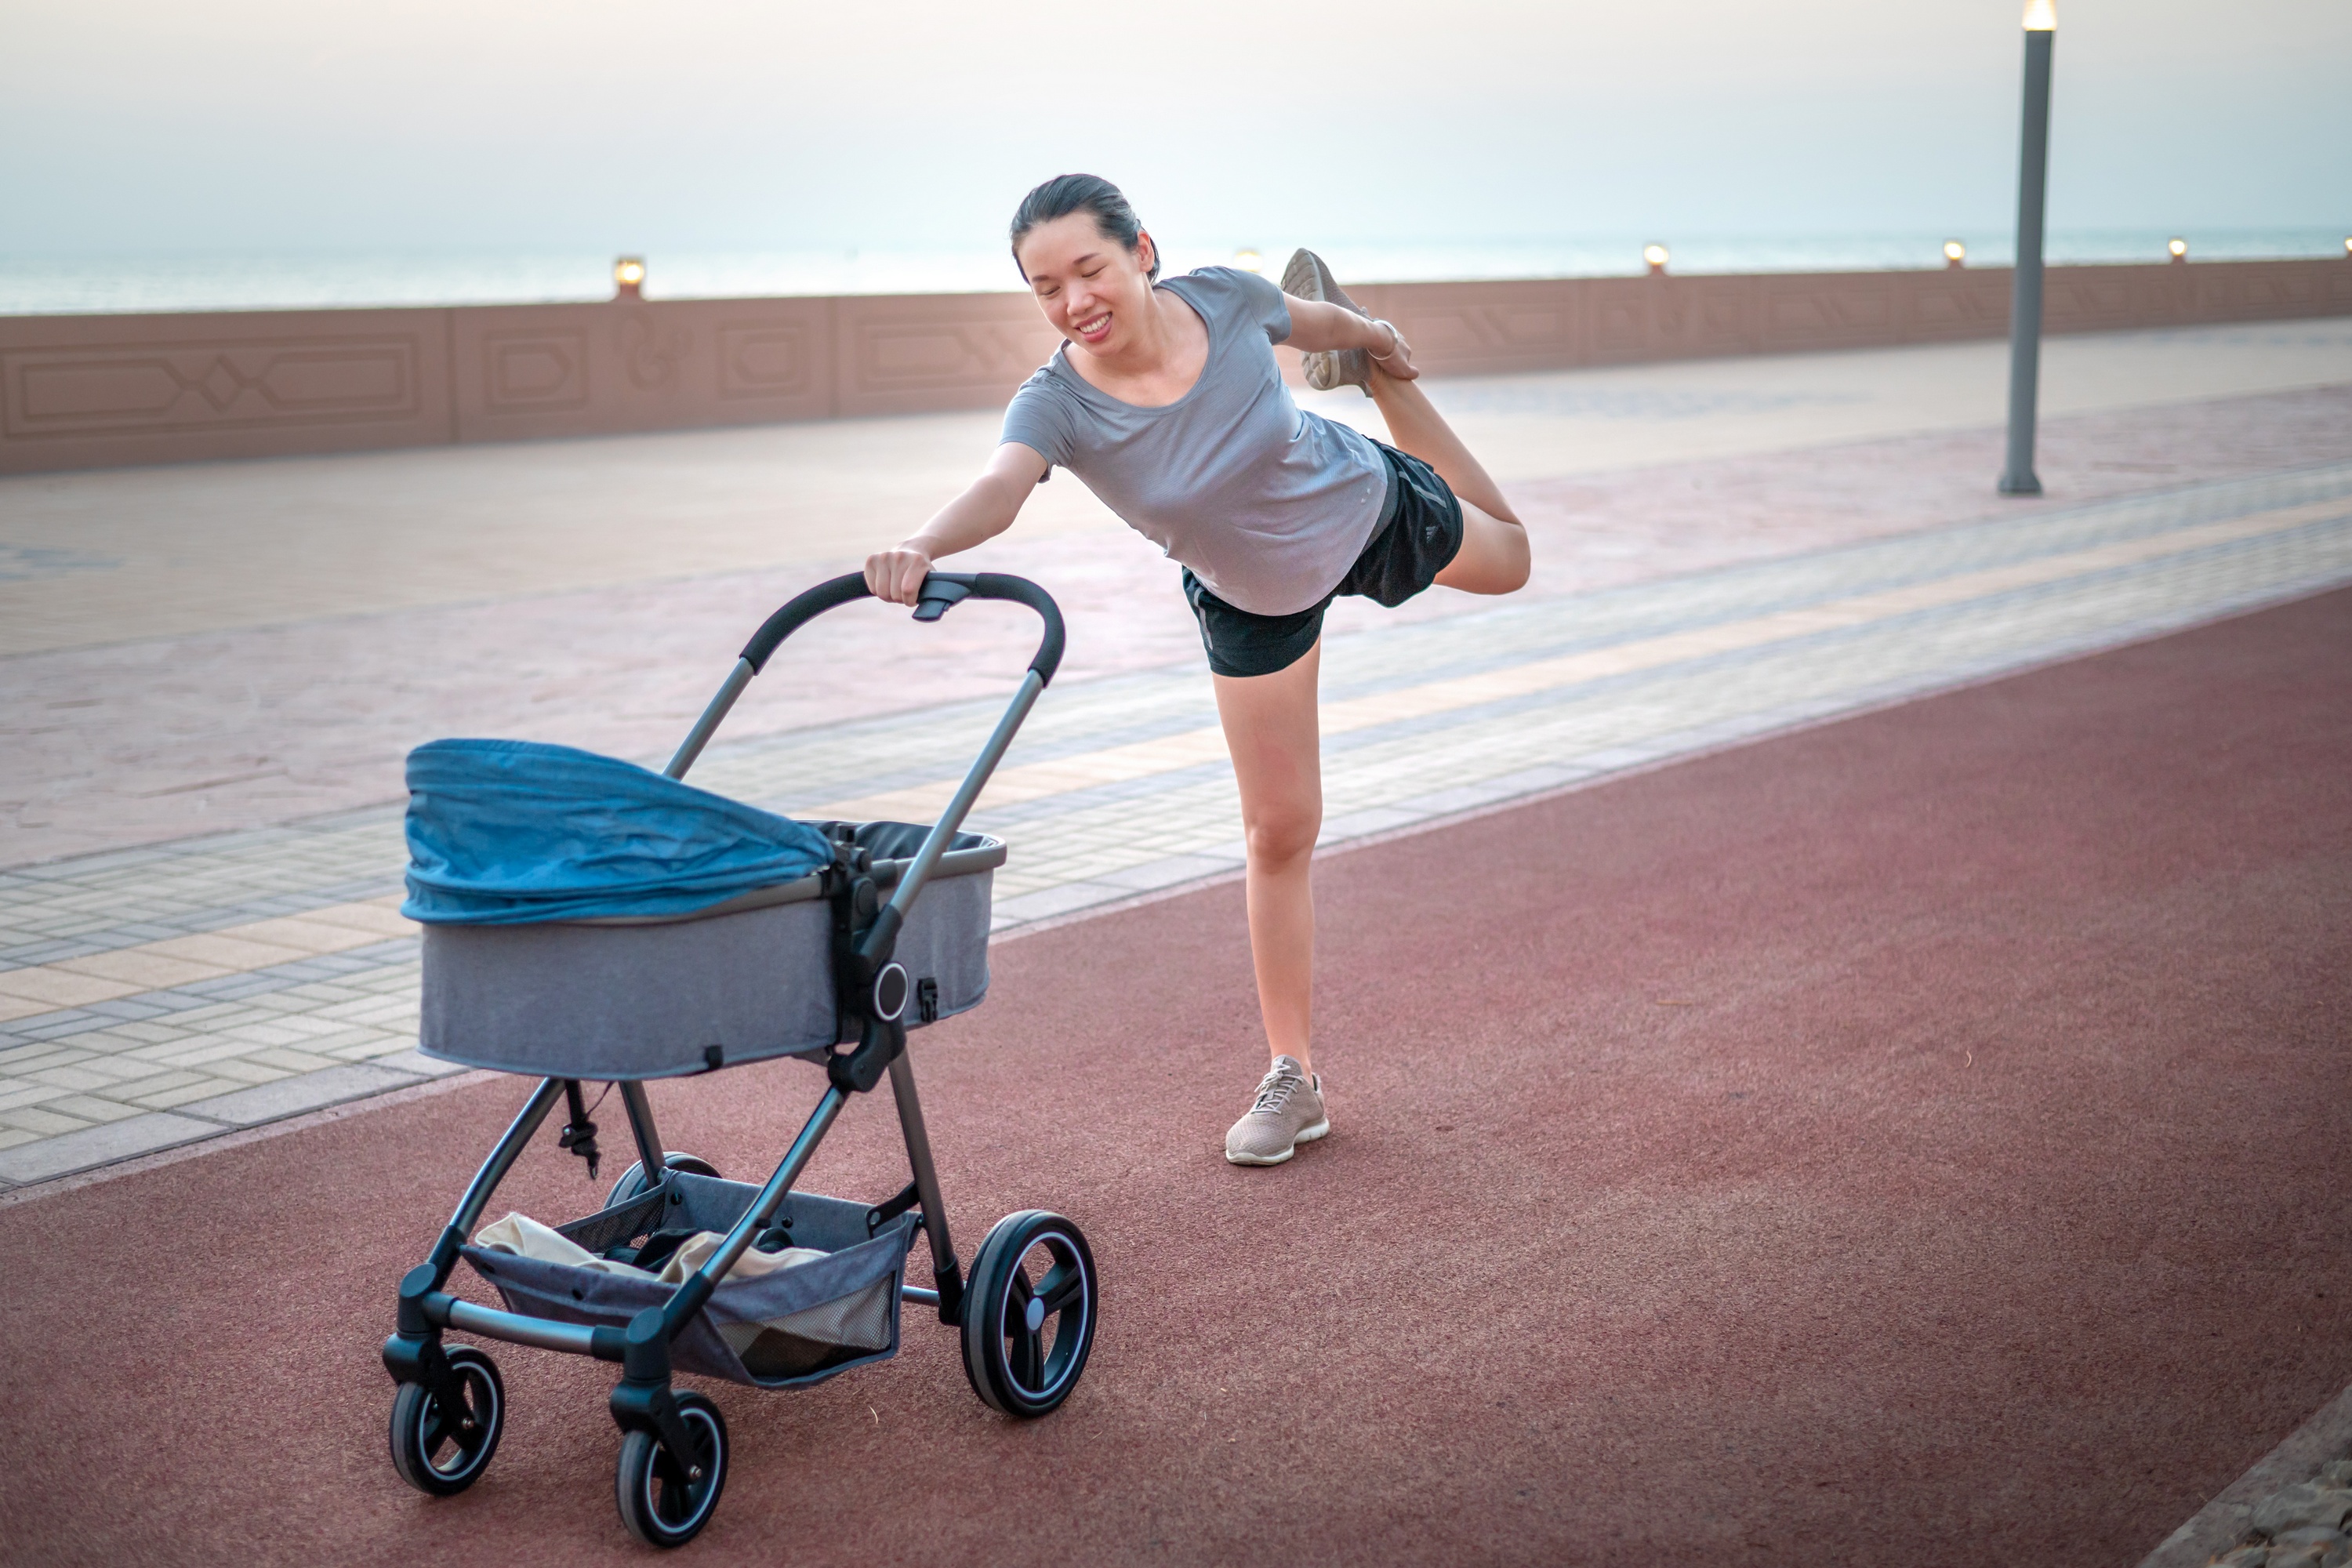 A mom working out while pushing her baby in a stroller.